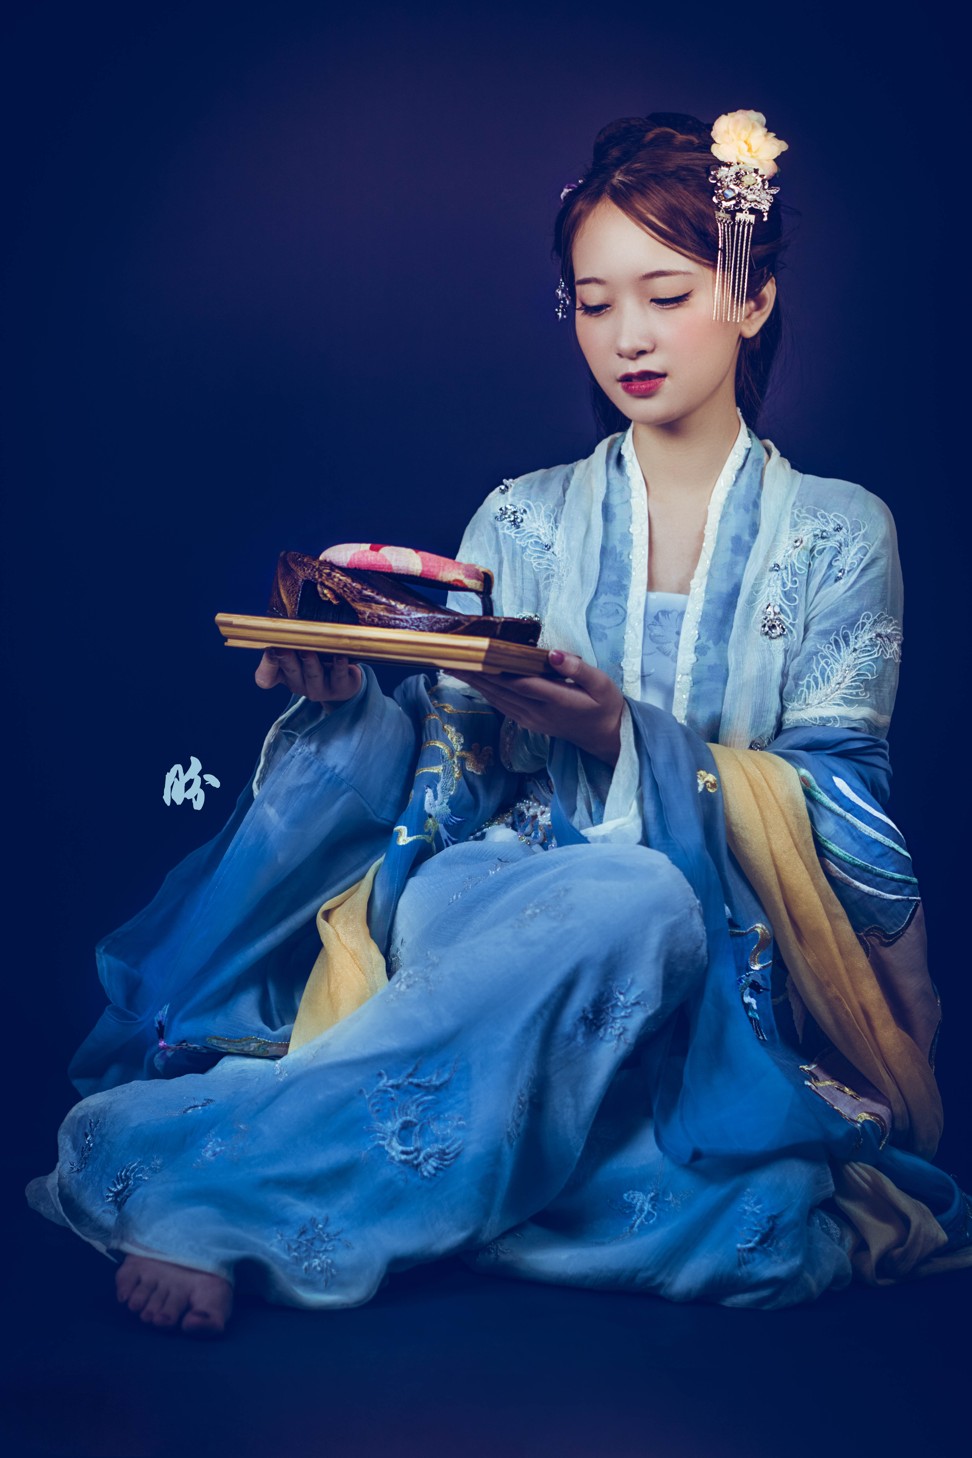 One of the Hanfugirls dressed as Xi Shi, who was born in a mountain village where her father was a firewood vendor and her mother a weaver, and her feet were said to be large because she grew up working as a labourer. Photo: Hanfugirls Collective